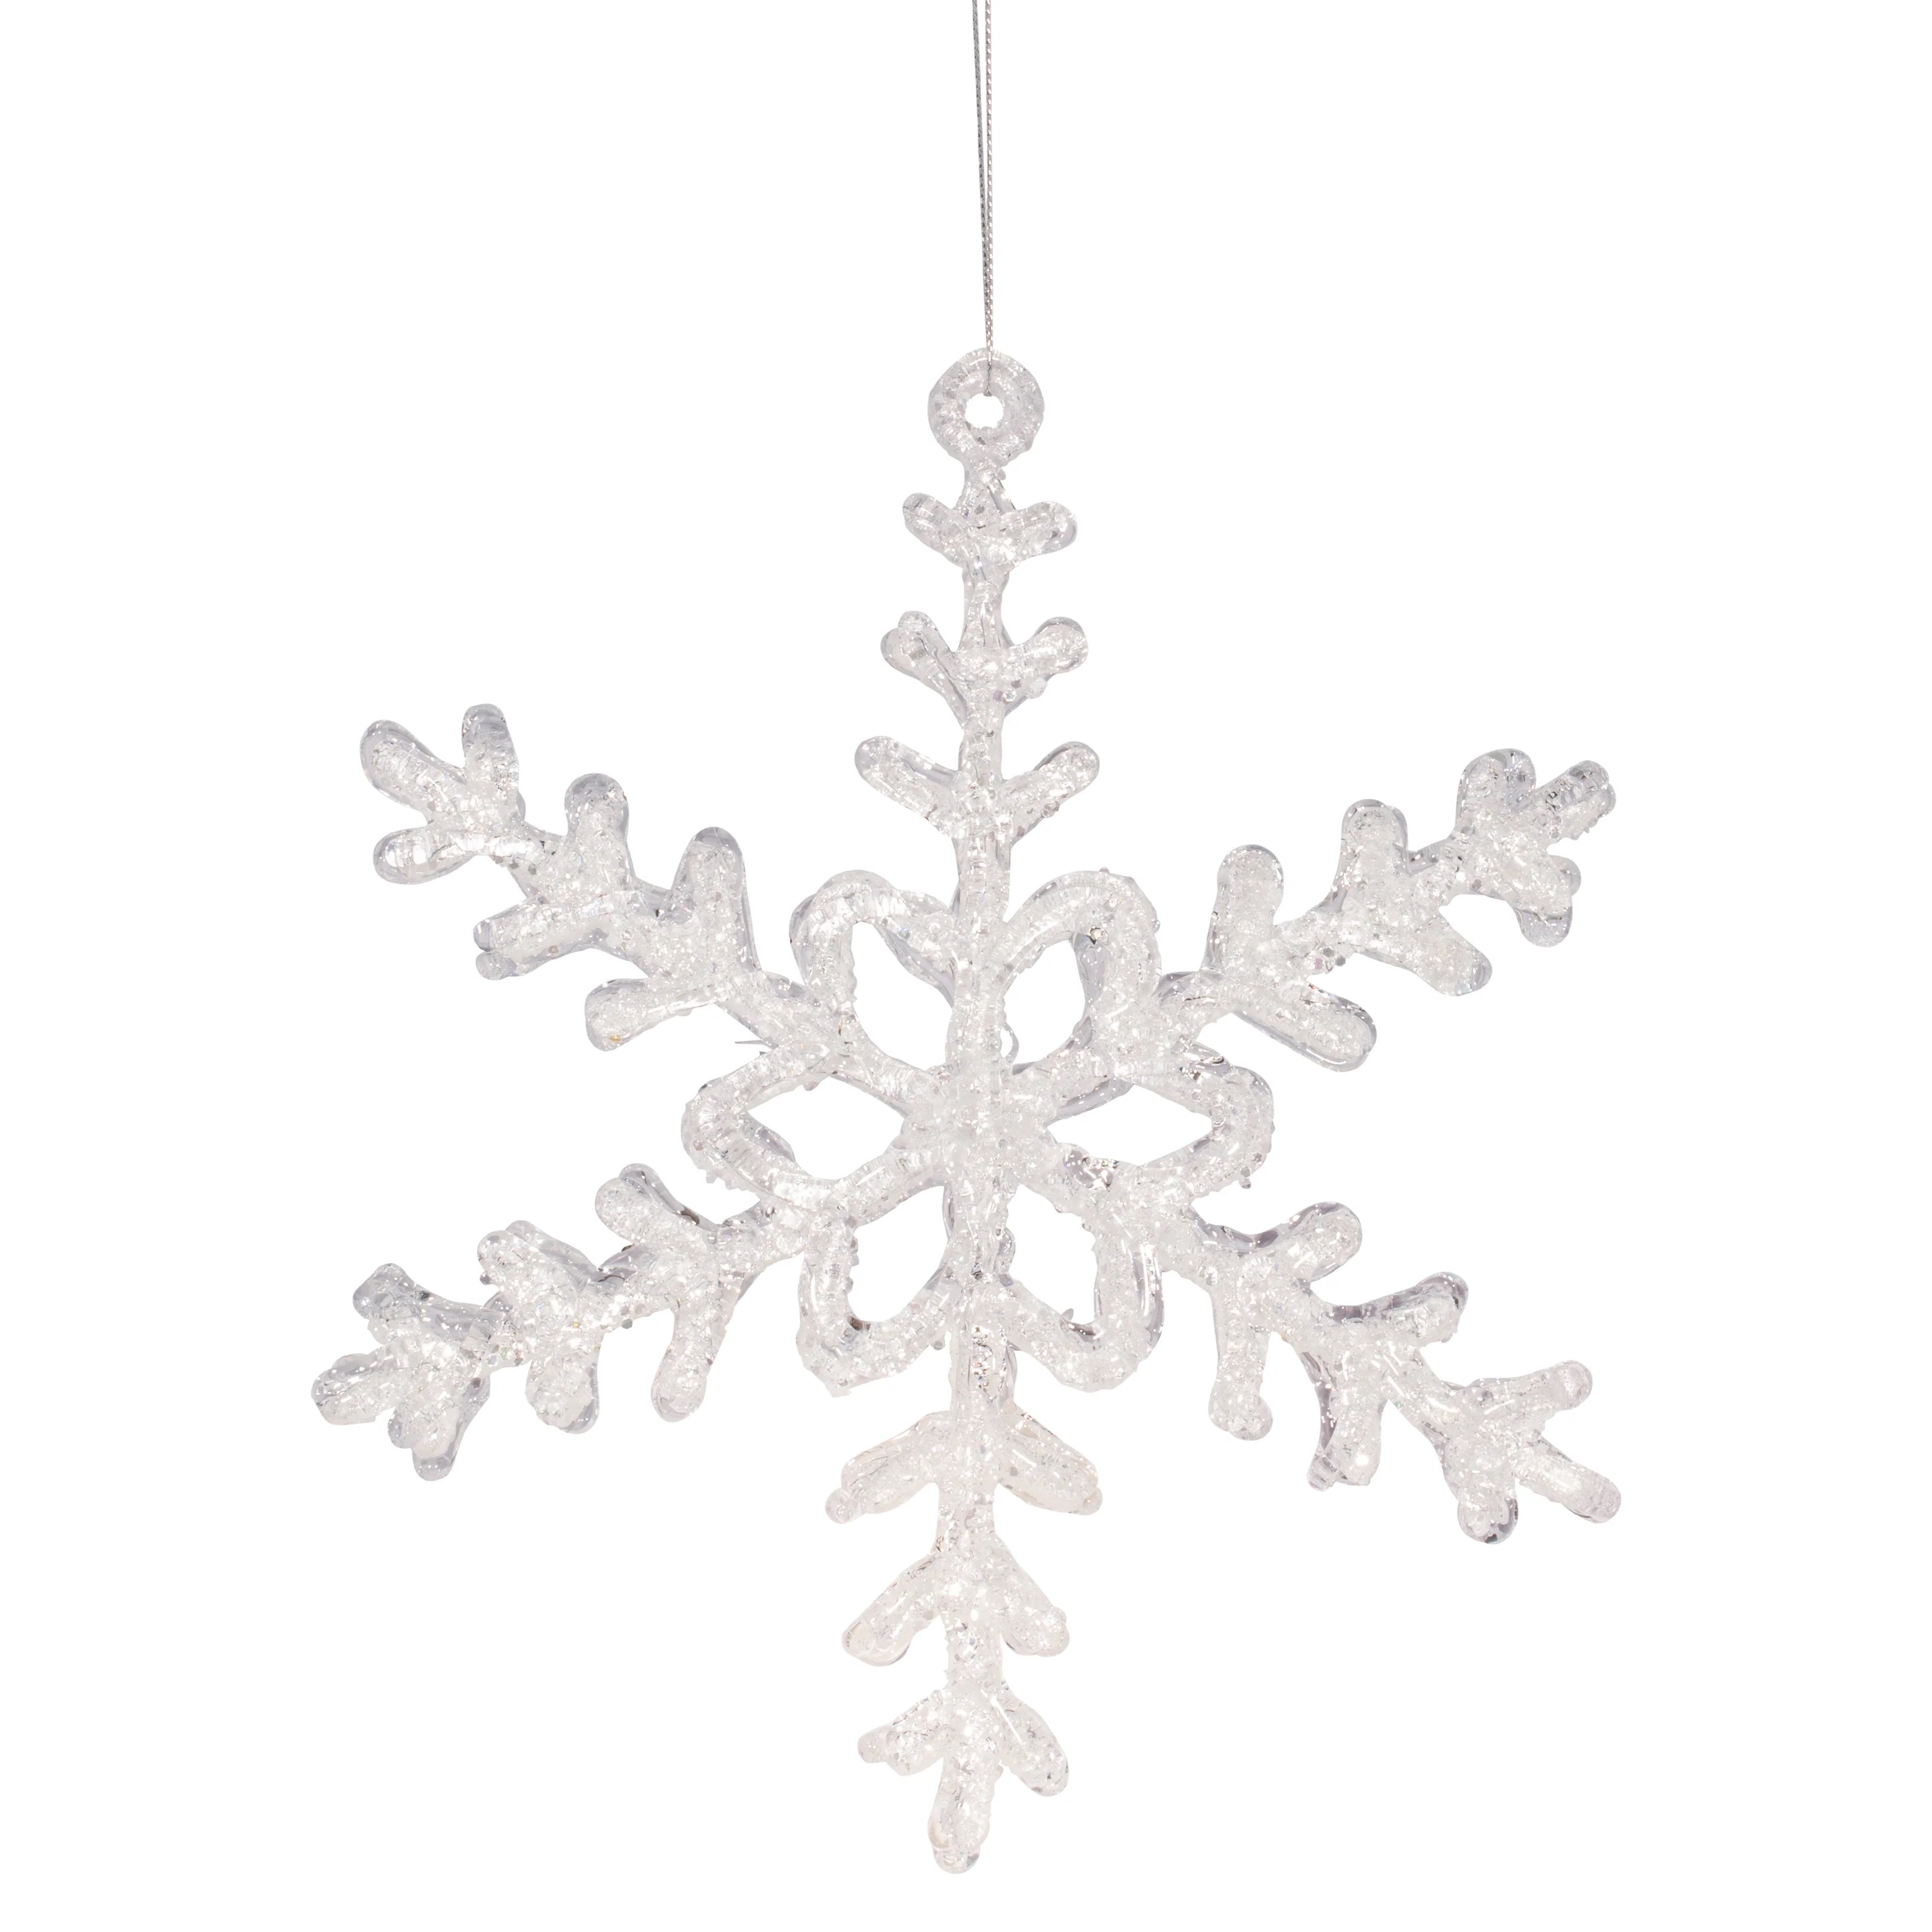 67 x Silver Snowflake Hanging Ornament - Large